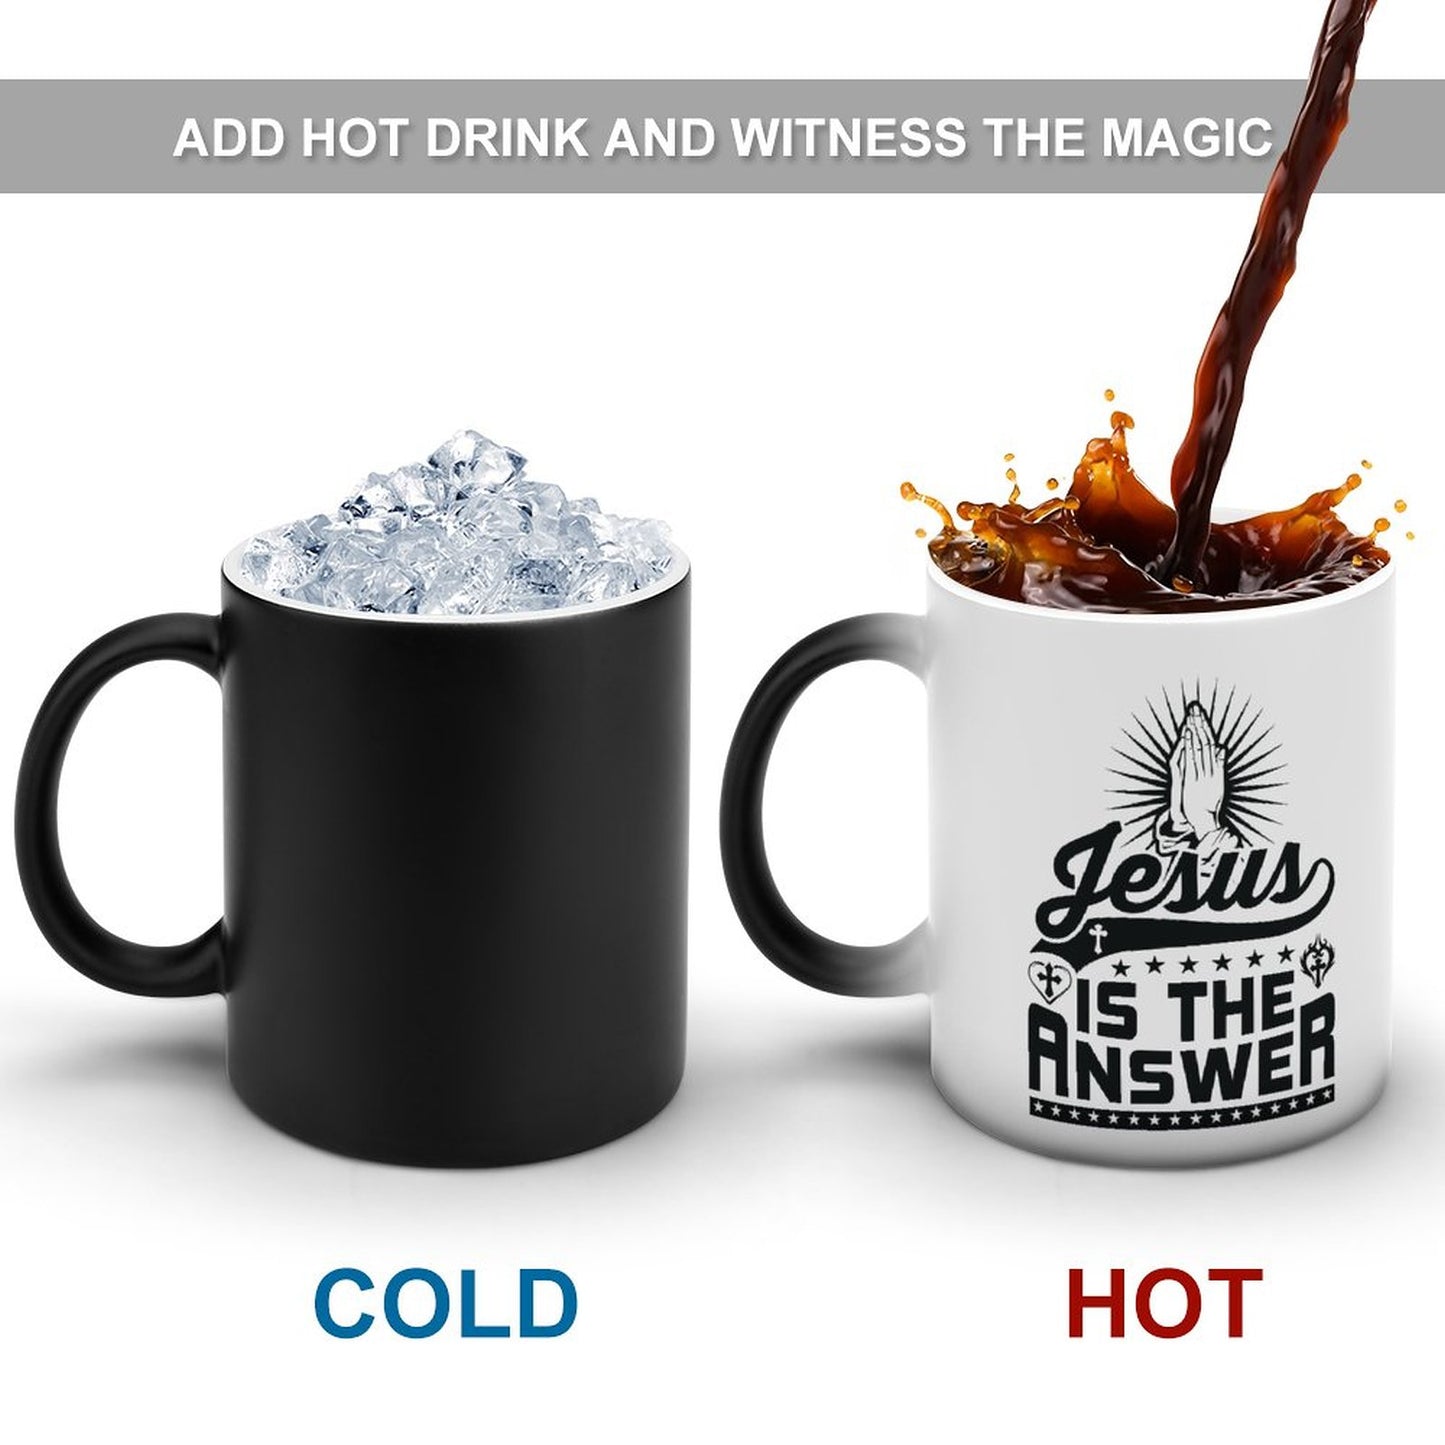 Jesus Is The Answer Christian Color Changing Mug (Dual-sided)